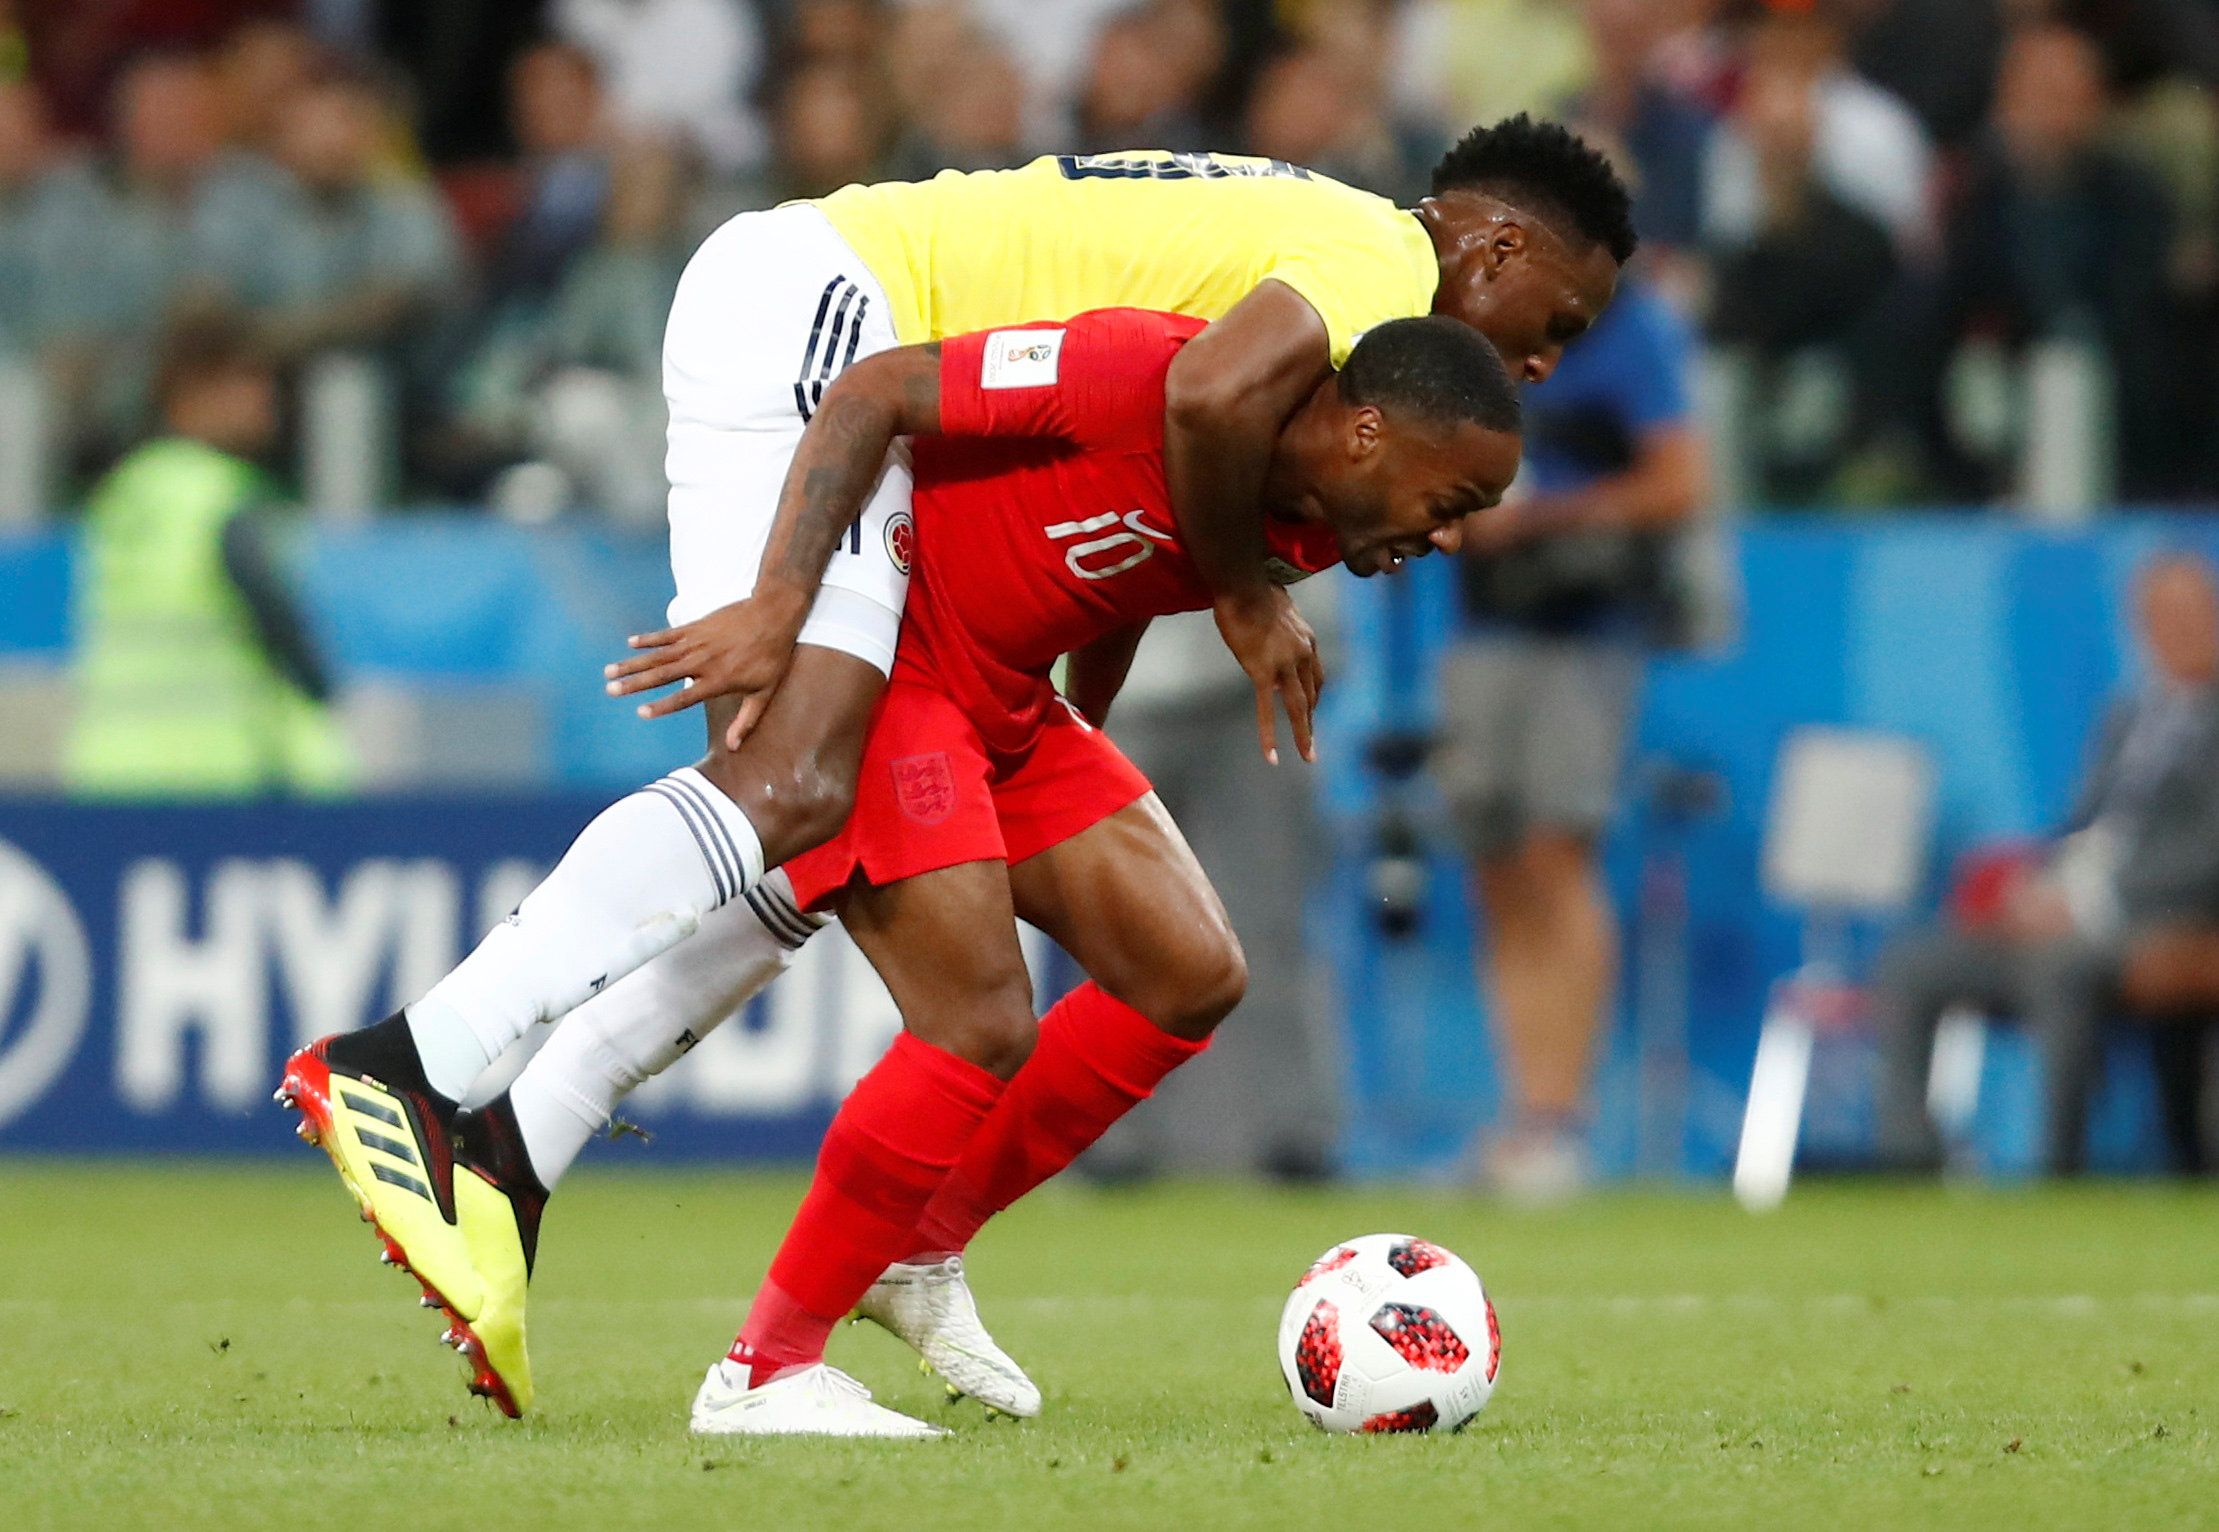 Soccer Football - World Cup - Round of 16 - Colombia vs England - Spartak Stadium, Moscow, Russia - July 3, 2018  England's Raheem Sterling in action with Colombia's Yerry Mina    REUTERS/Maxim Shemetov